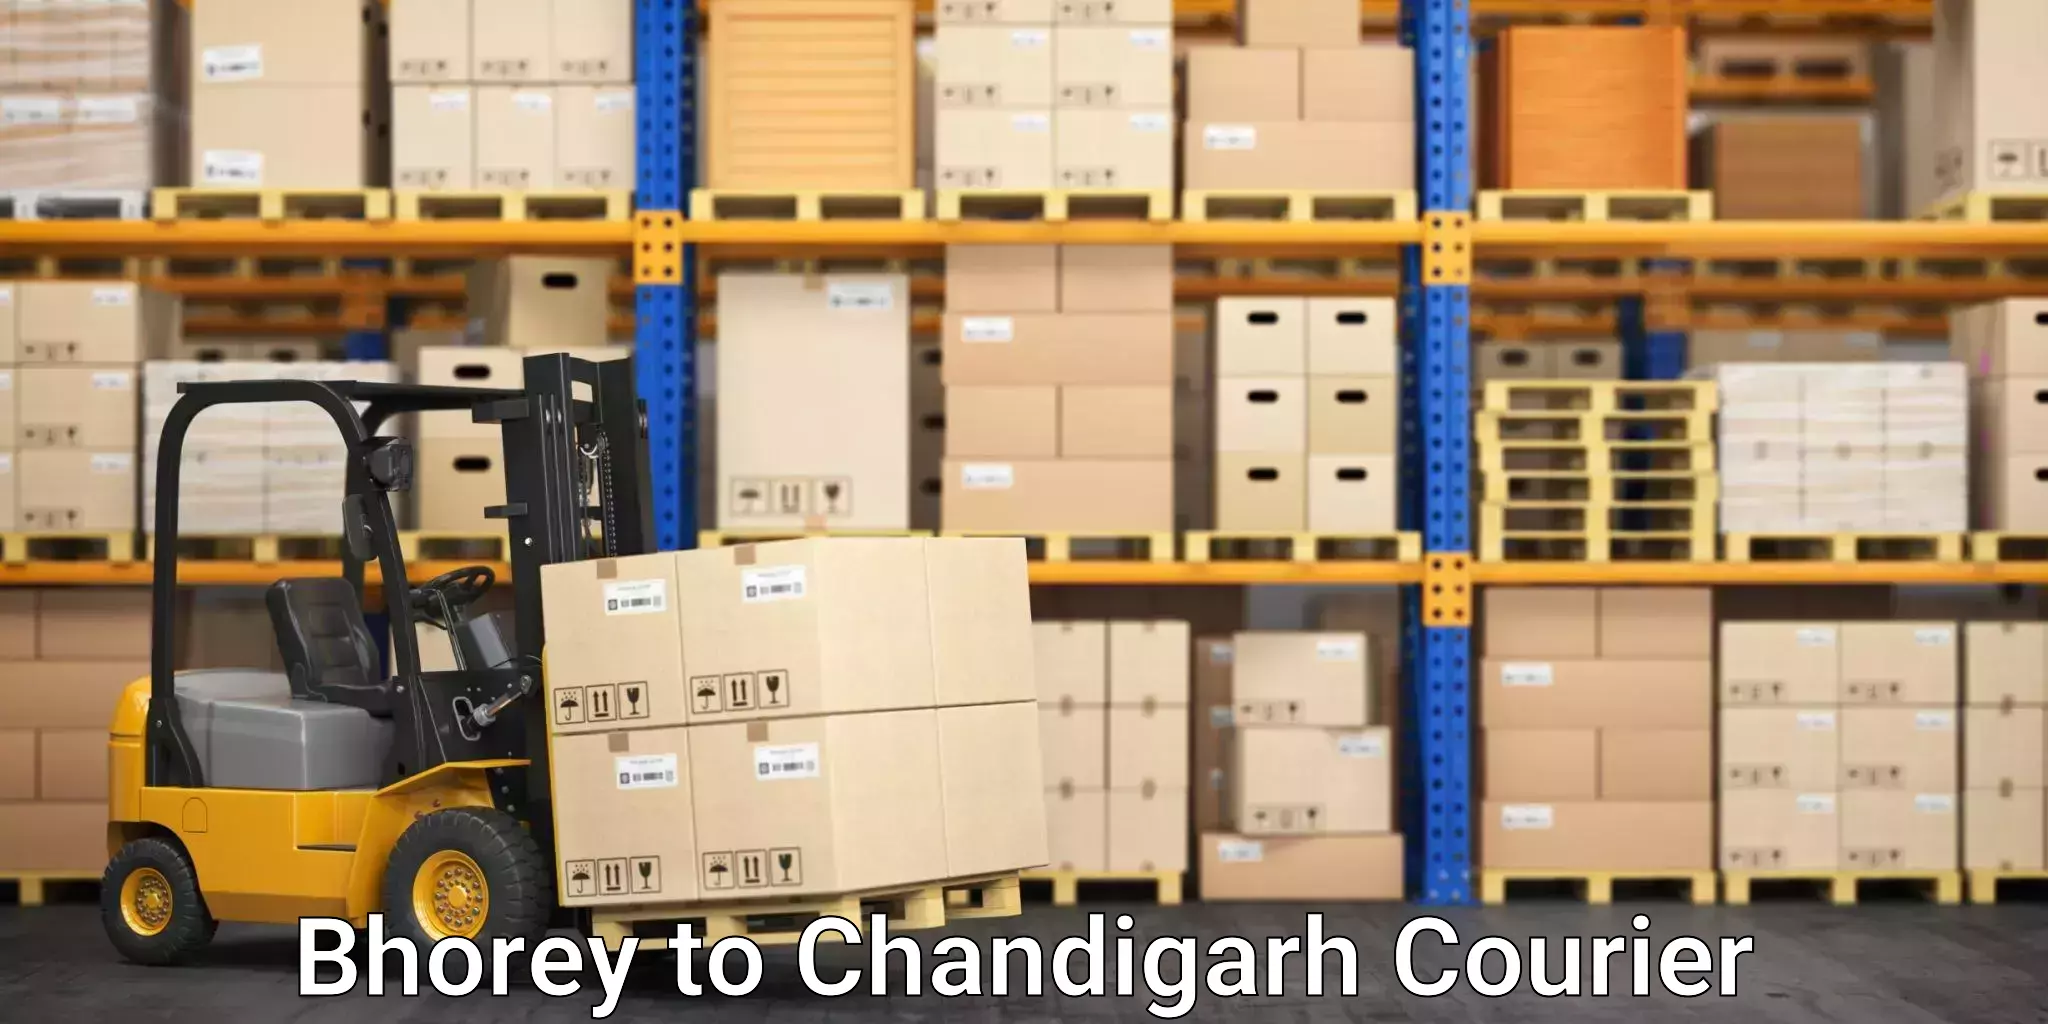 Furniture shipping services Bhorey to Chandigarh